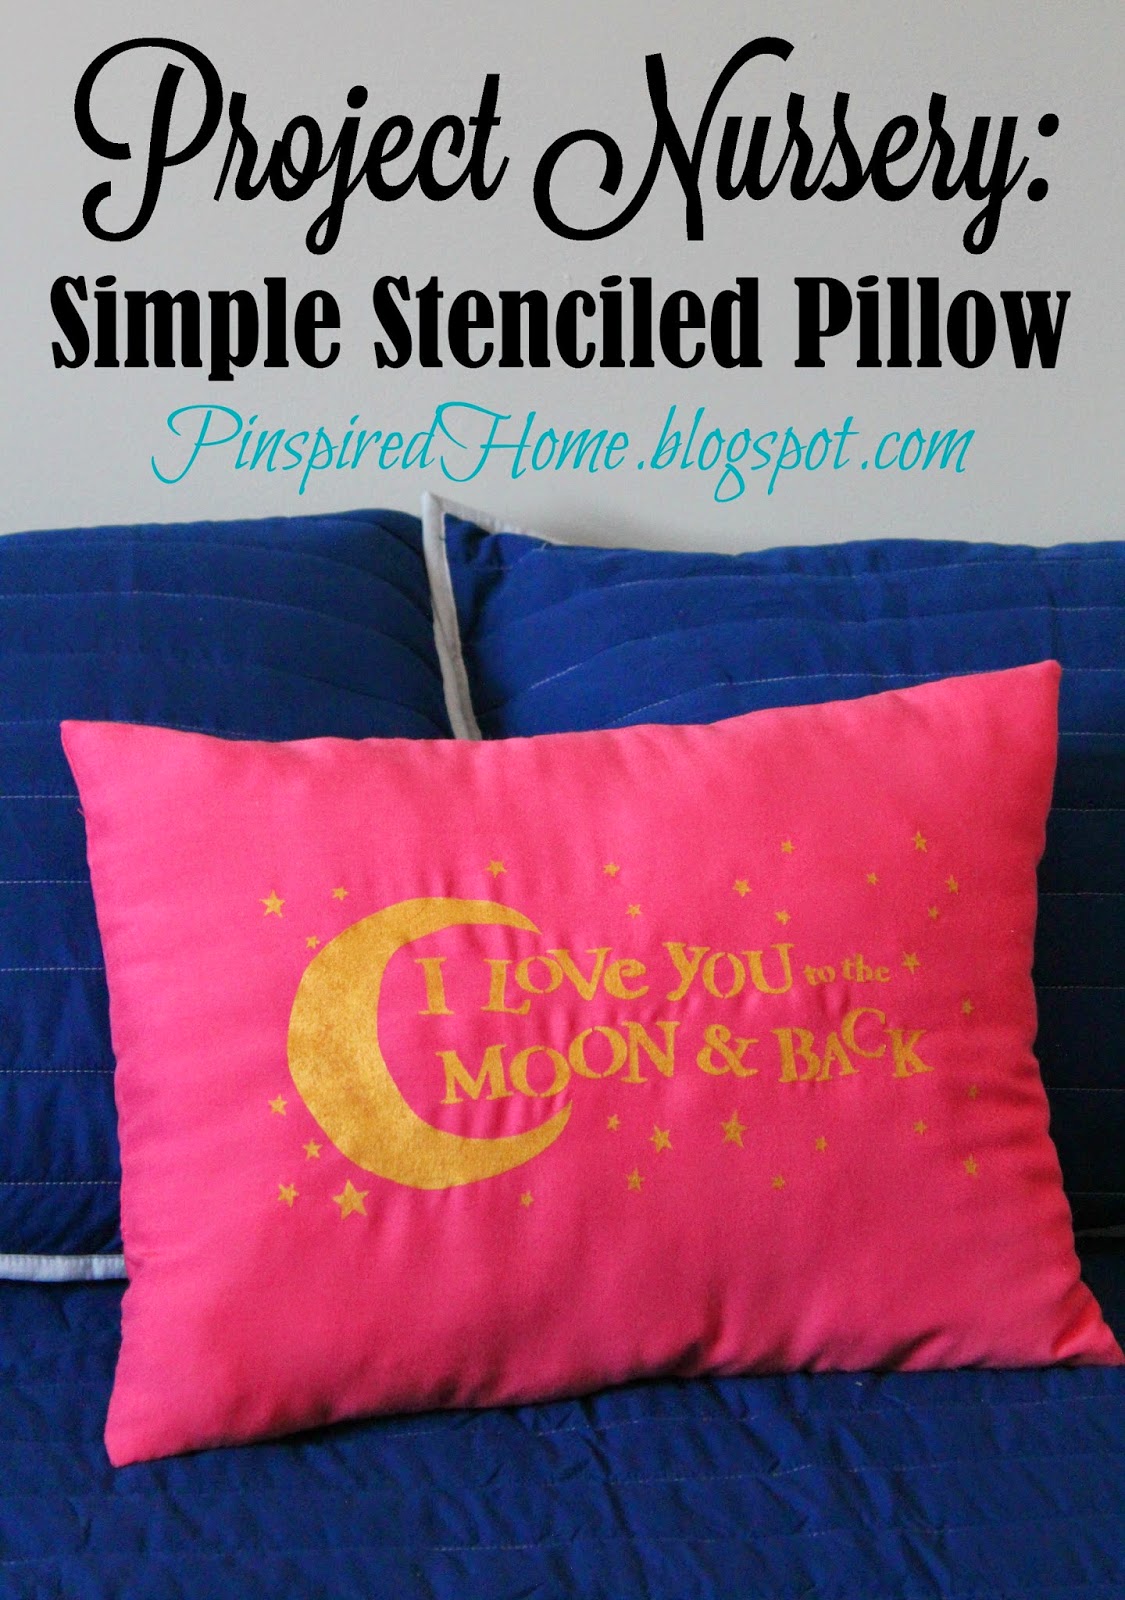 http://pinspiredhome.blogspot.com/2015/03/simple-stenciled-pillow.html